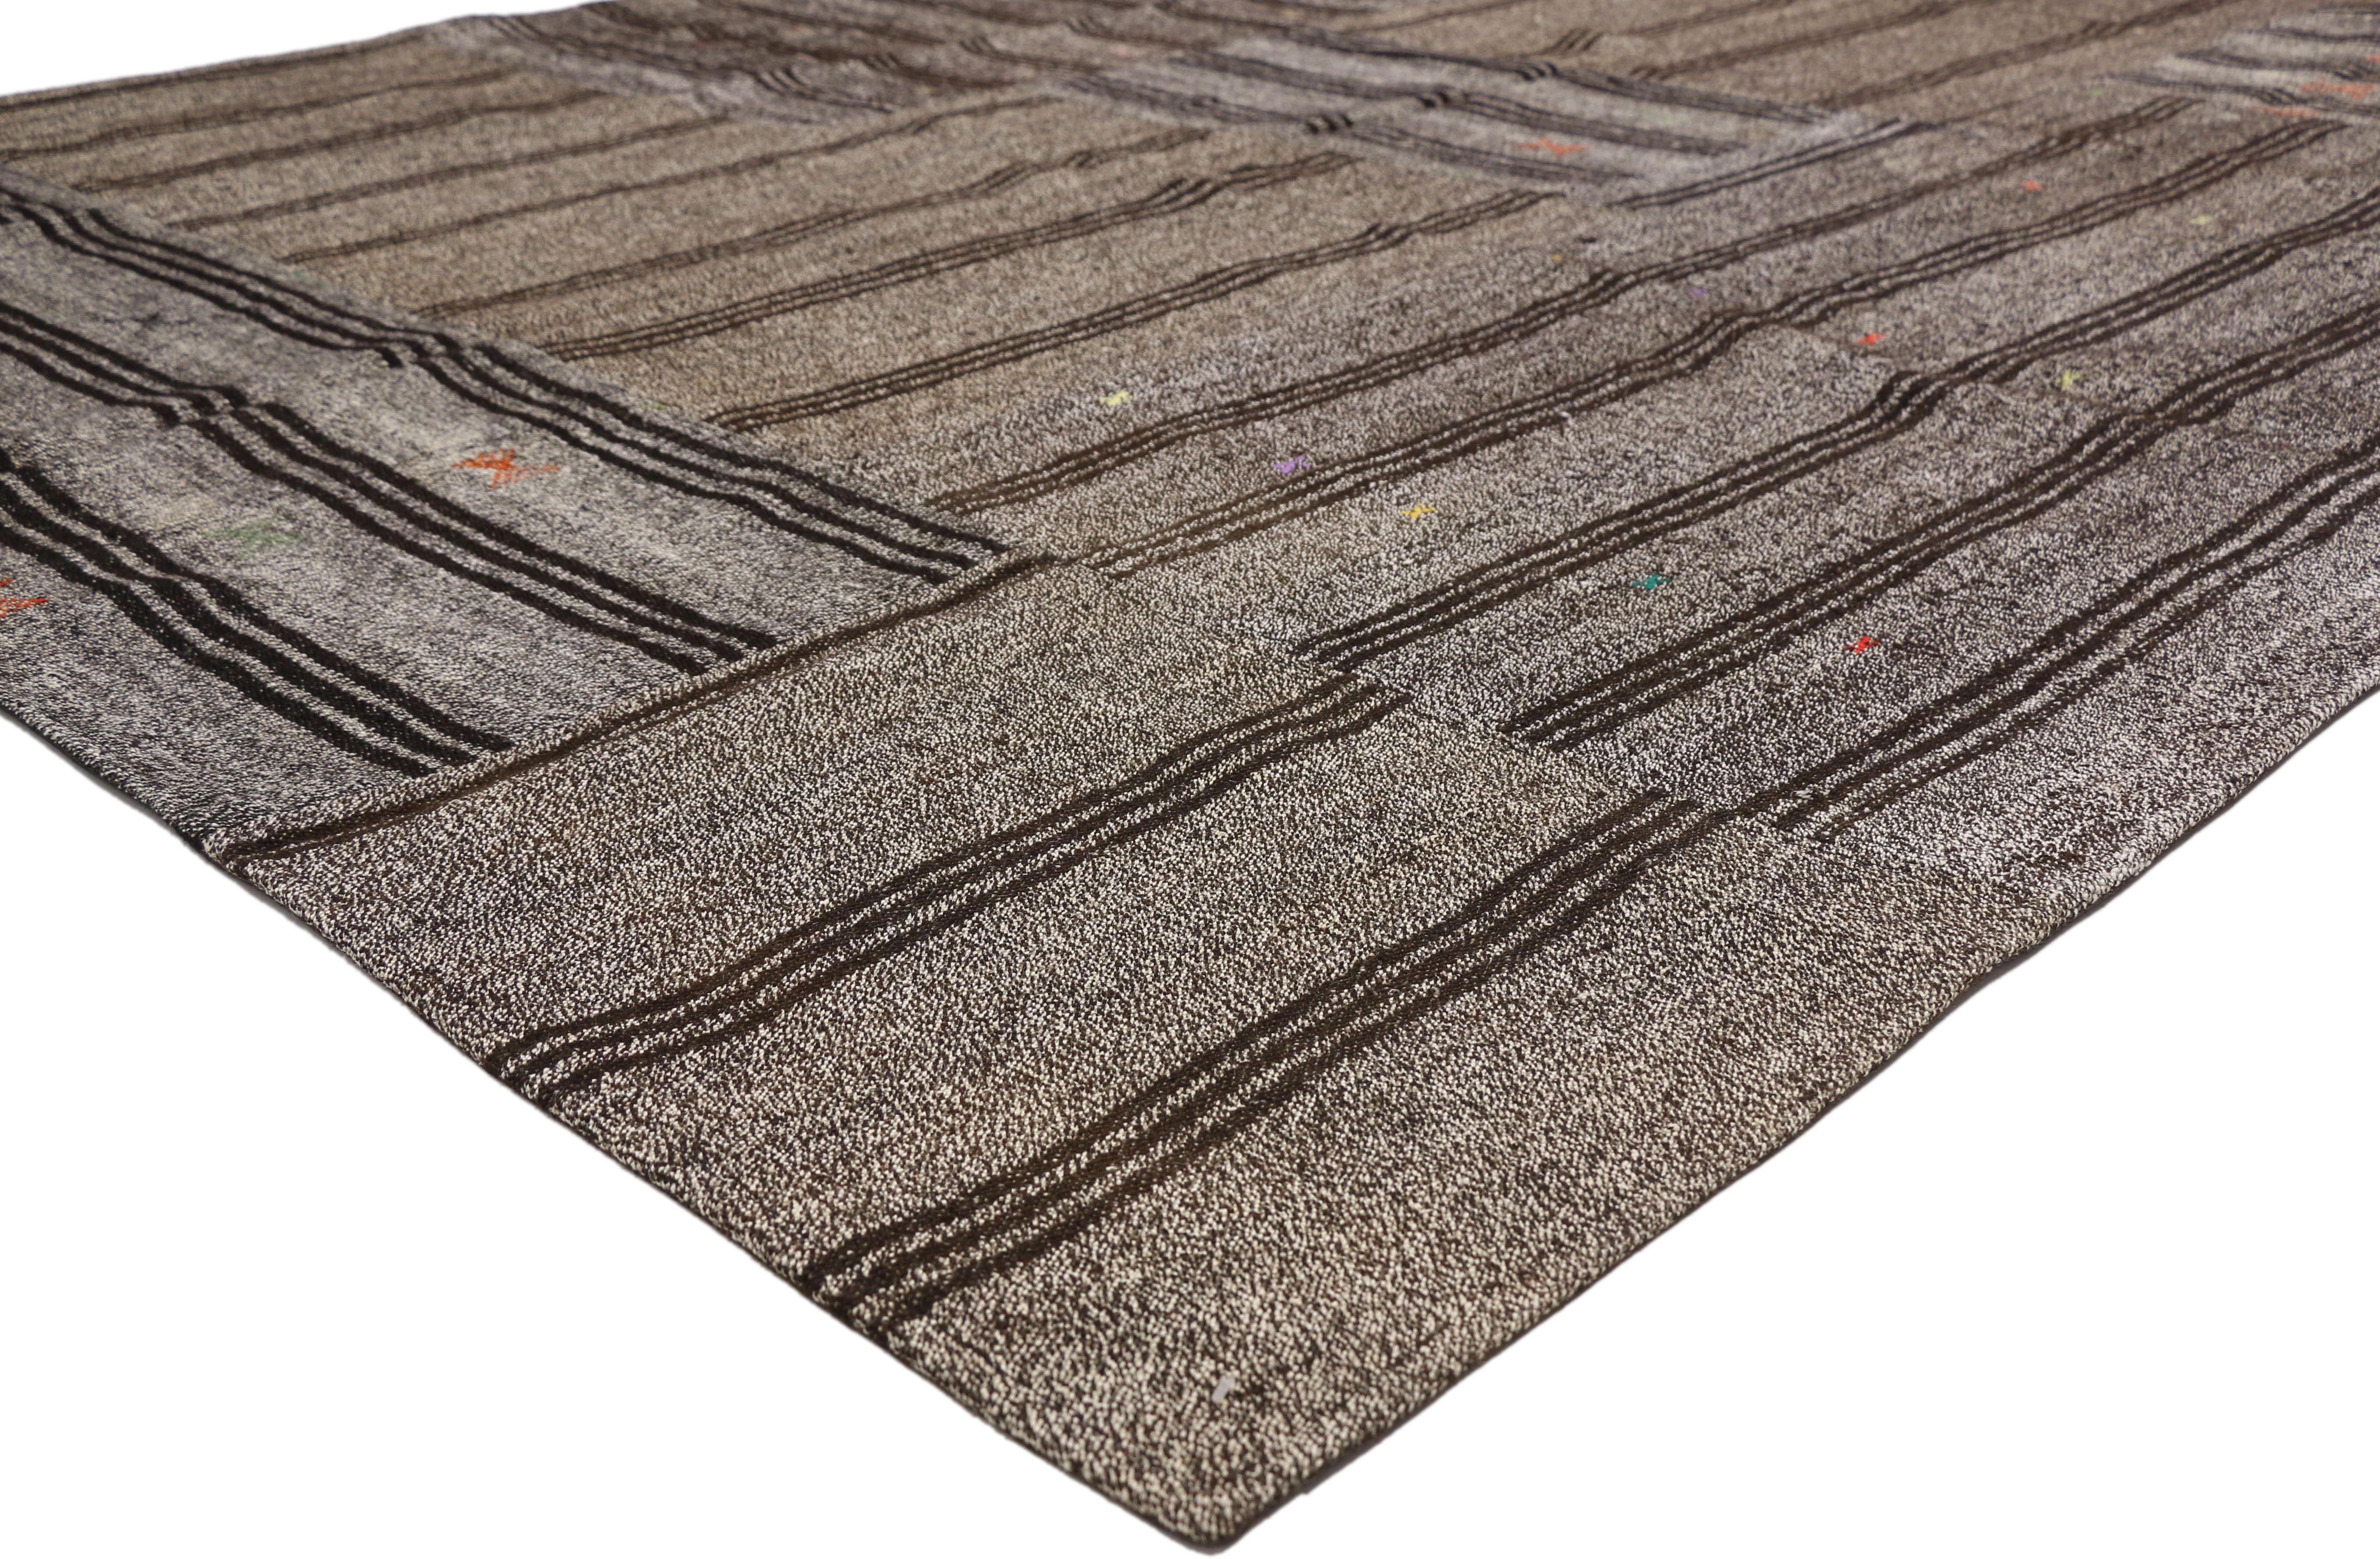 51839 Vintage Turkish Gray Flatweave Kilim Rug with Black Stripes, Flat-weave Rug. This vintage Turkish gray flatweave Kilim rug features black stripes and tribal motifs. A fine example of Minimalist style, simplicity with a twist of boho chic. With